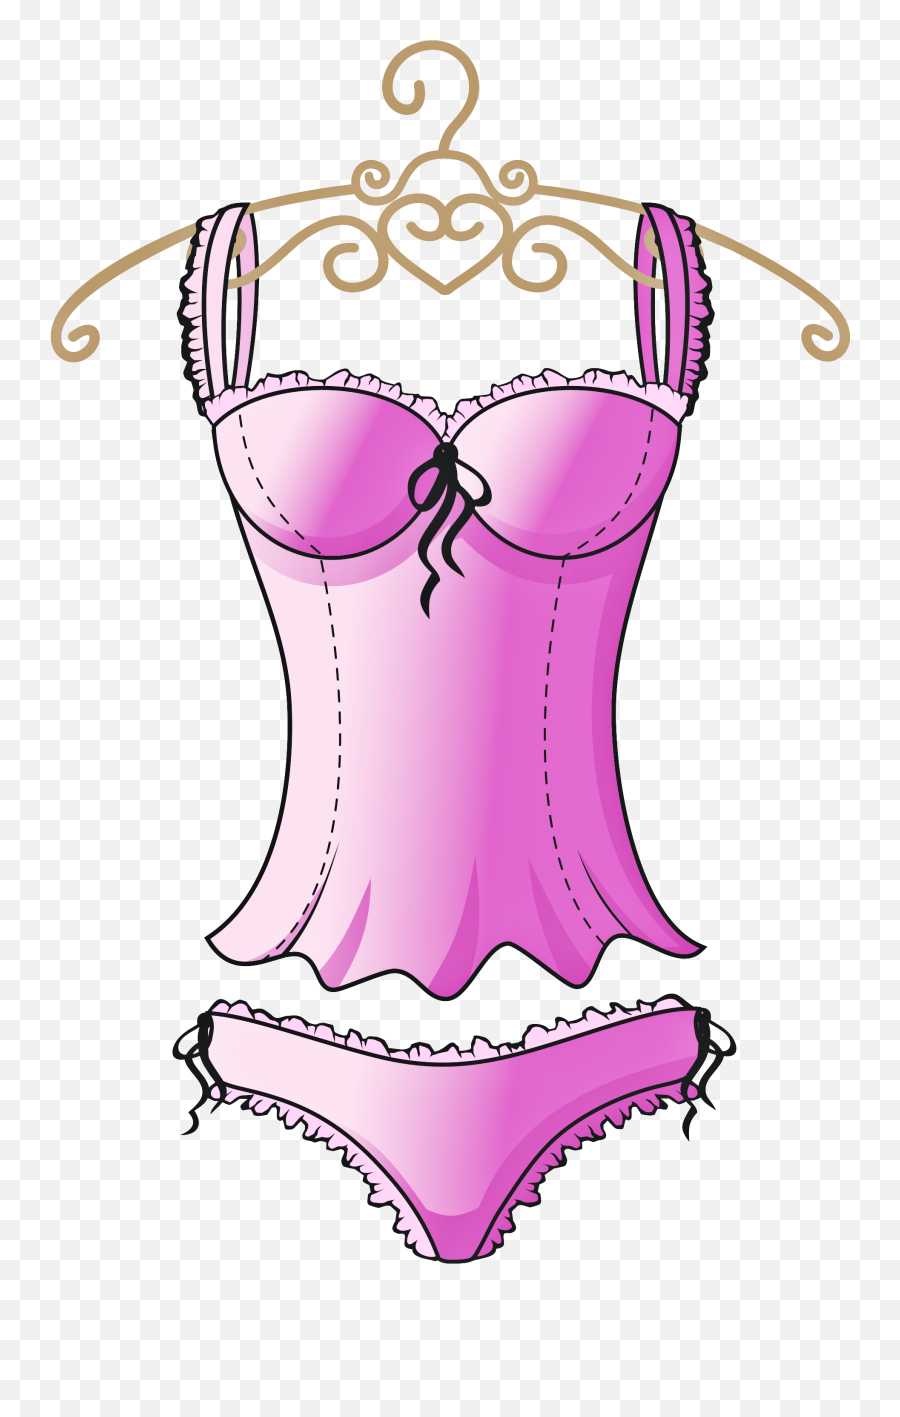 Contact Love Of Lingerie - Lingerie Png Background Emoji,Swimsuit Emoji